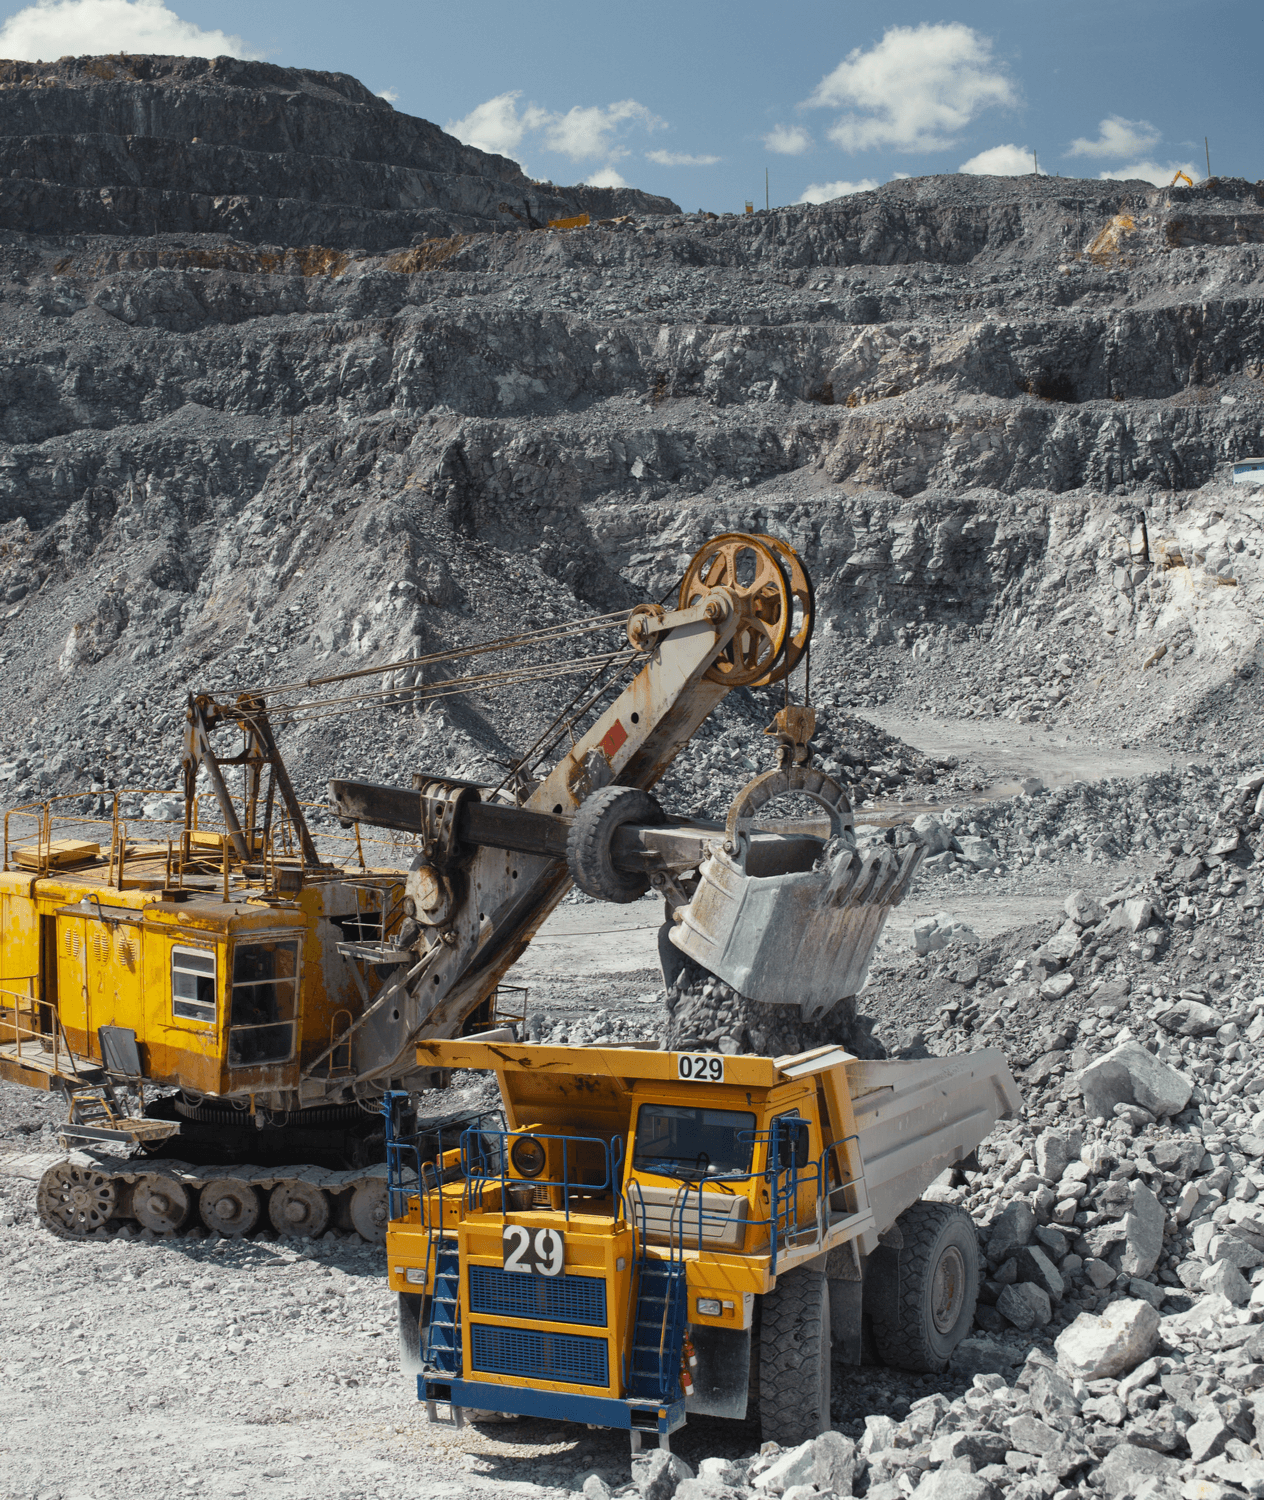 Heavy machinery moving rocks in a quarry.